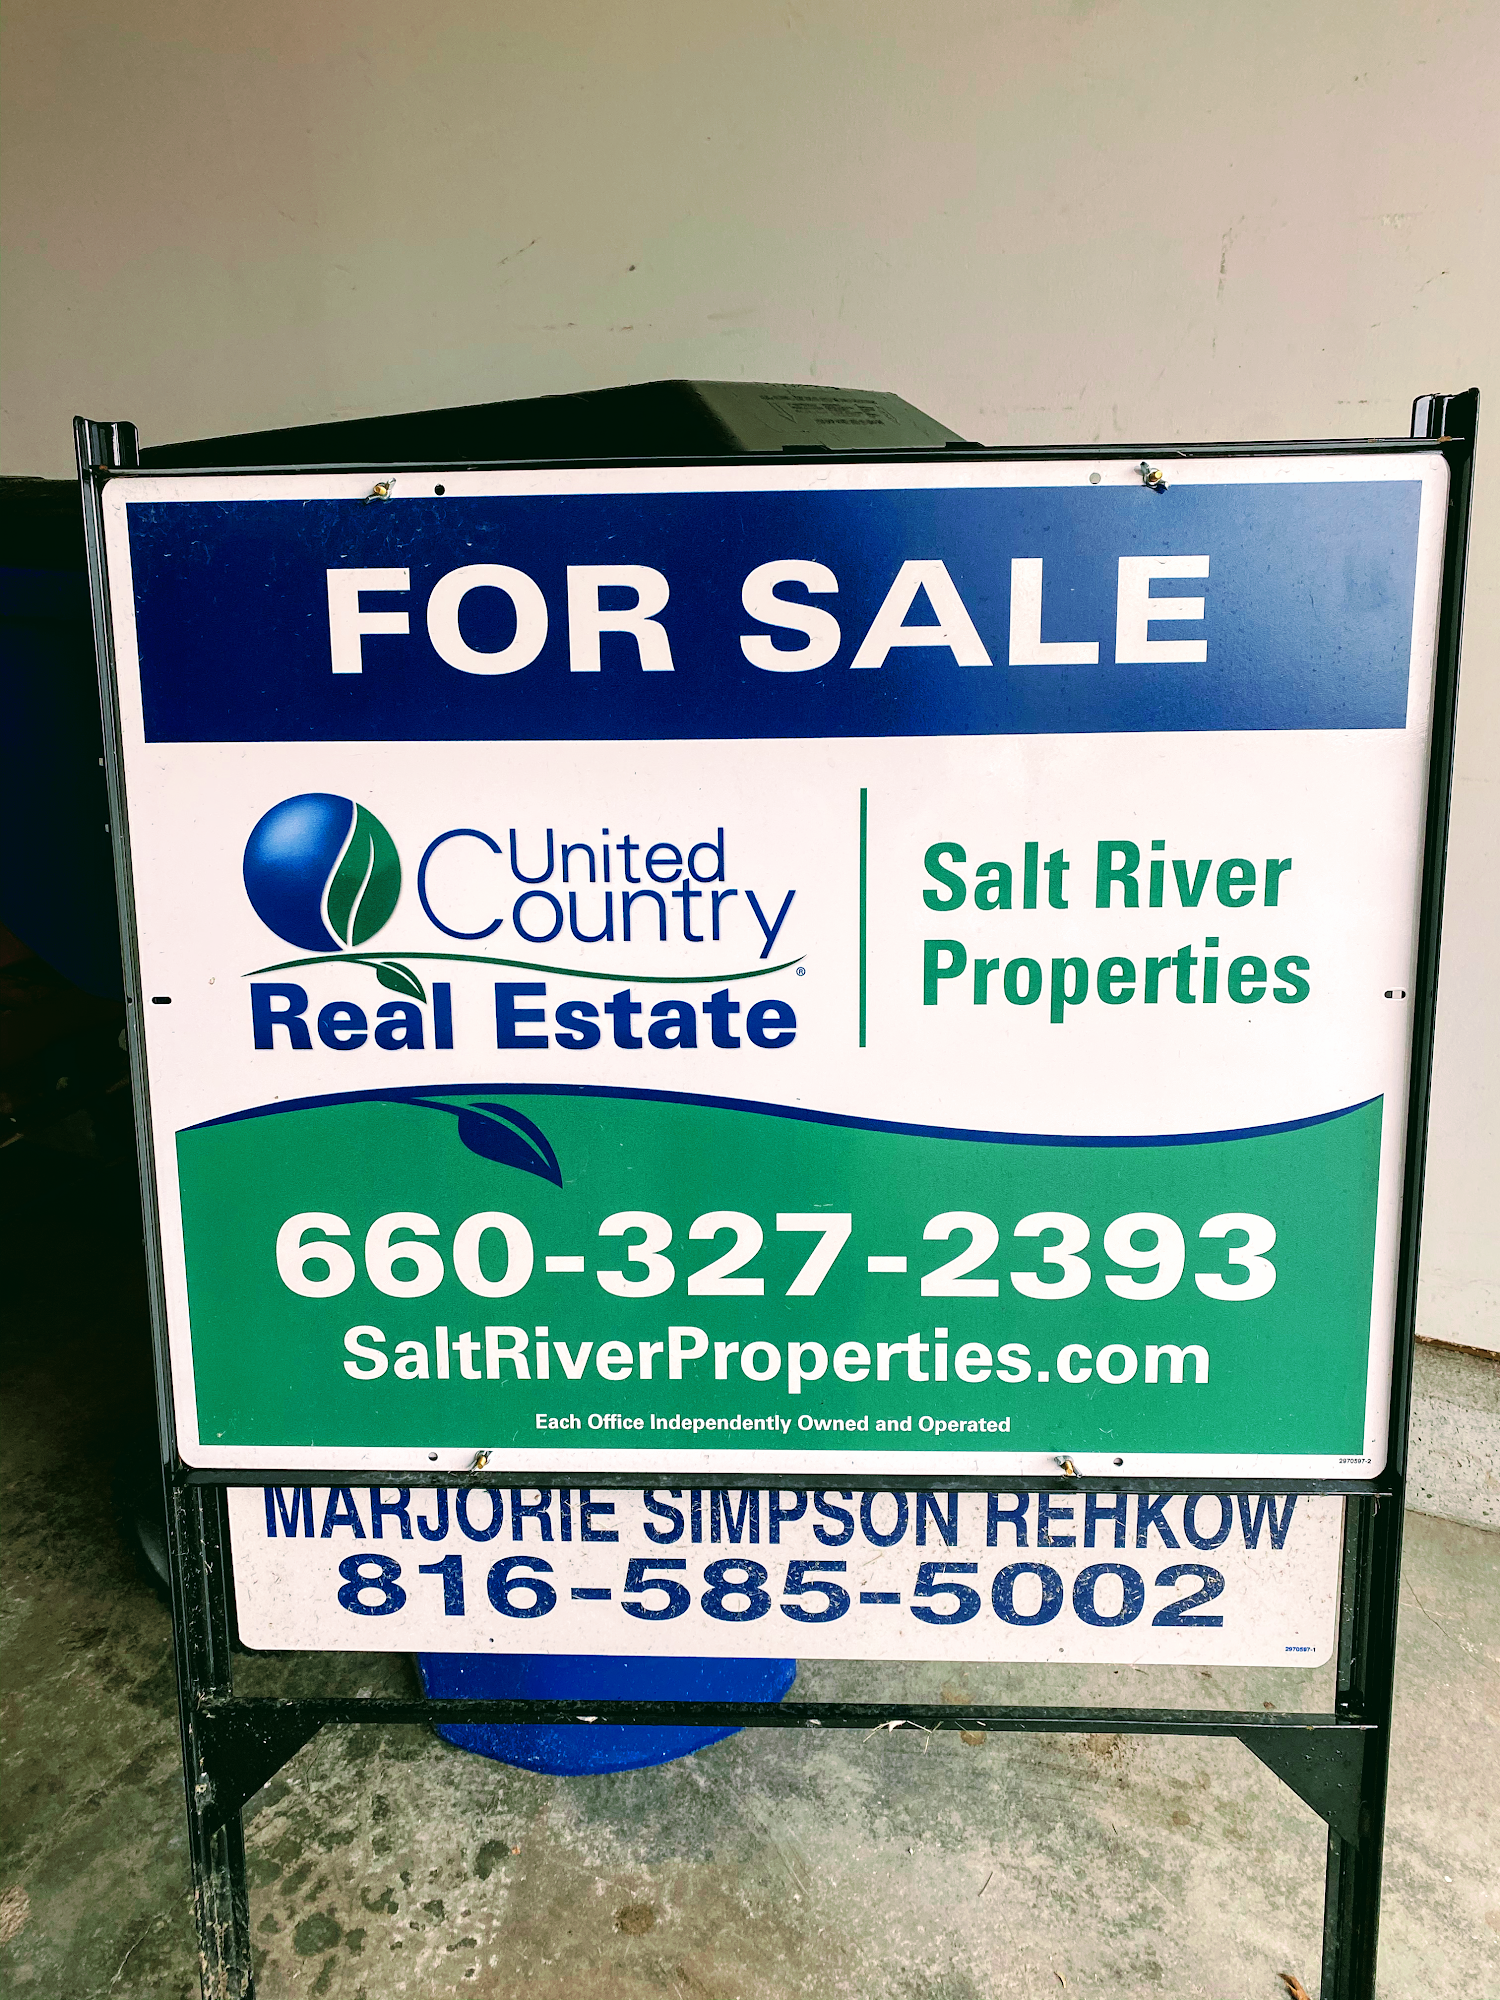 United Country Real Estate | Salt River Properties